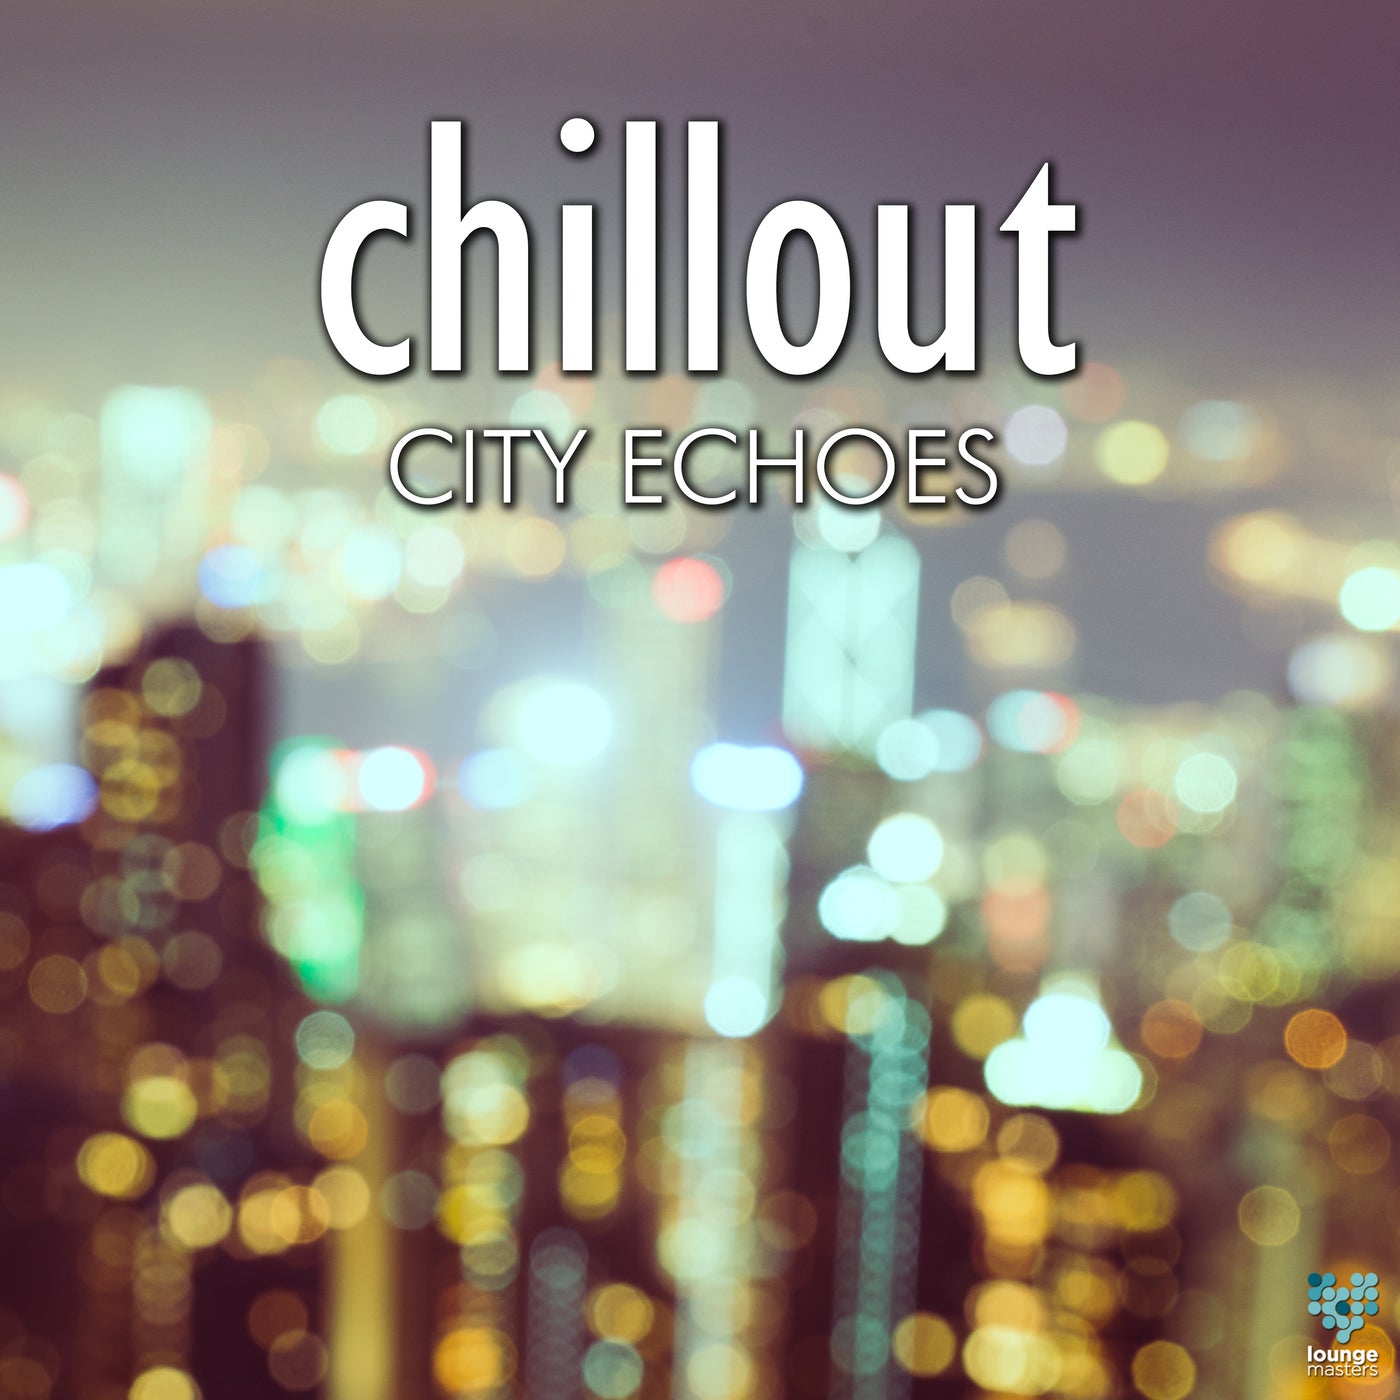 Chillout City Echoes